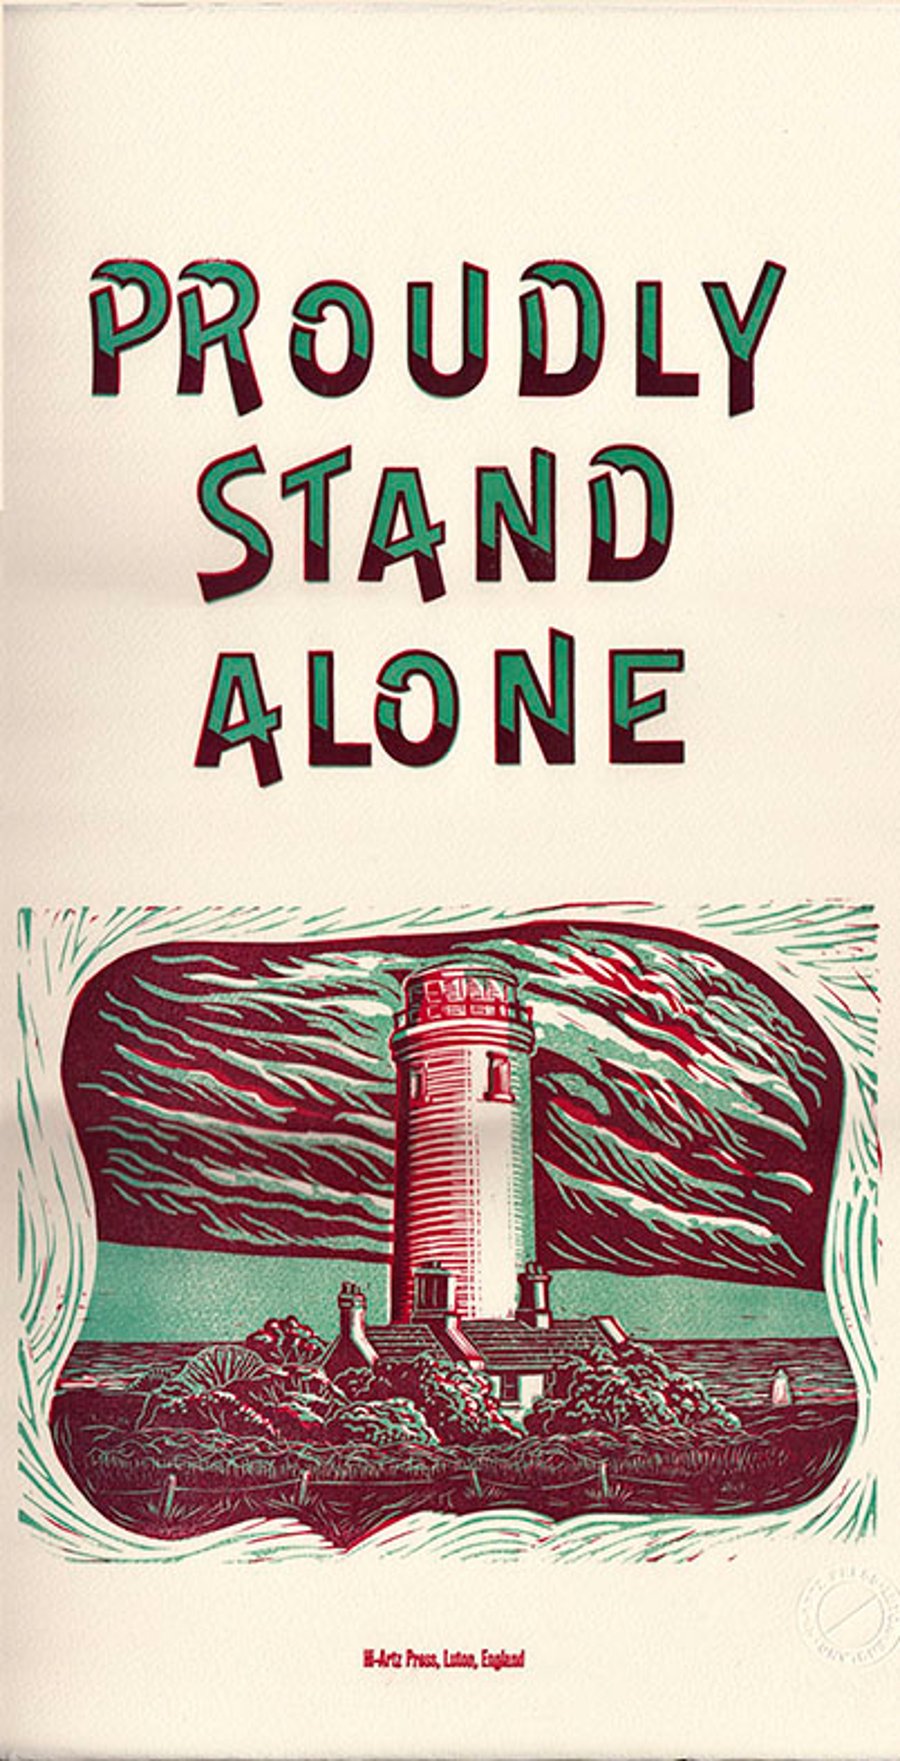 "Proudly Stand Alone" Letterpress & Lino-Cut Poster. 